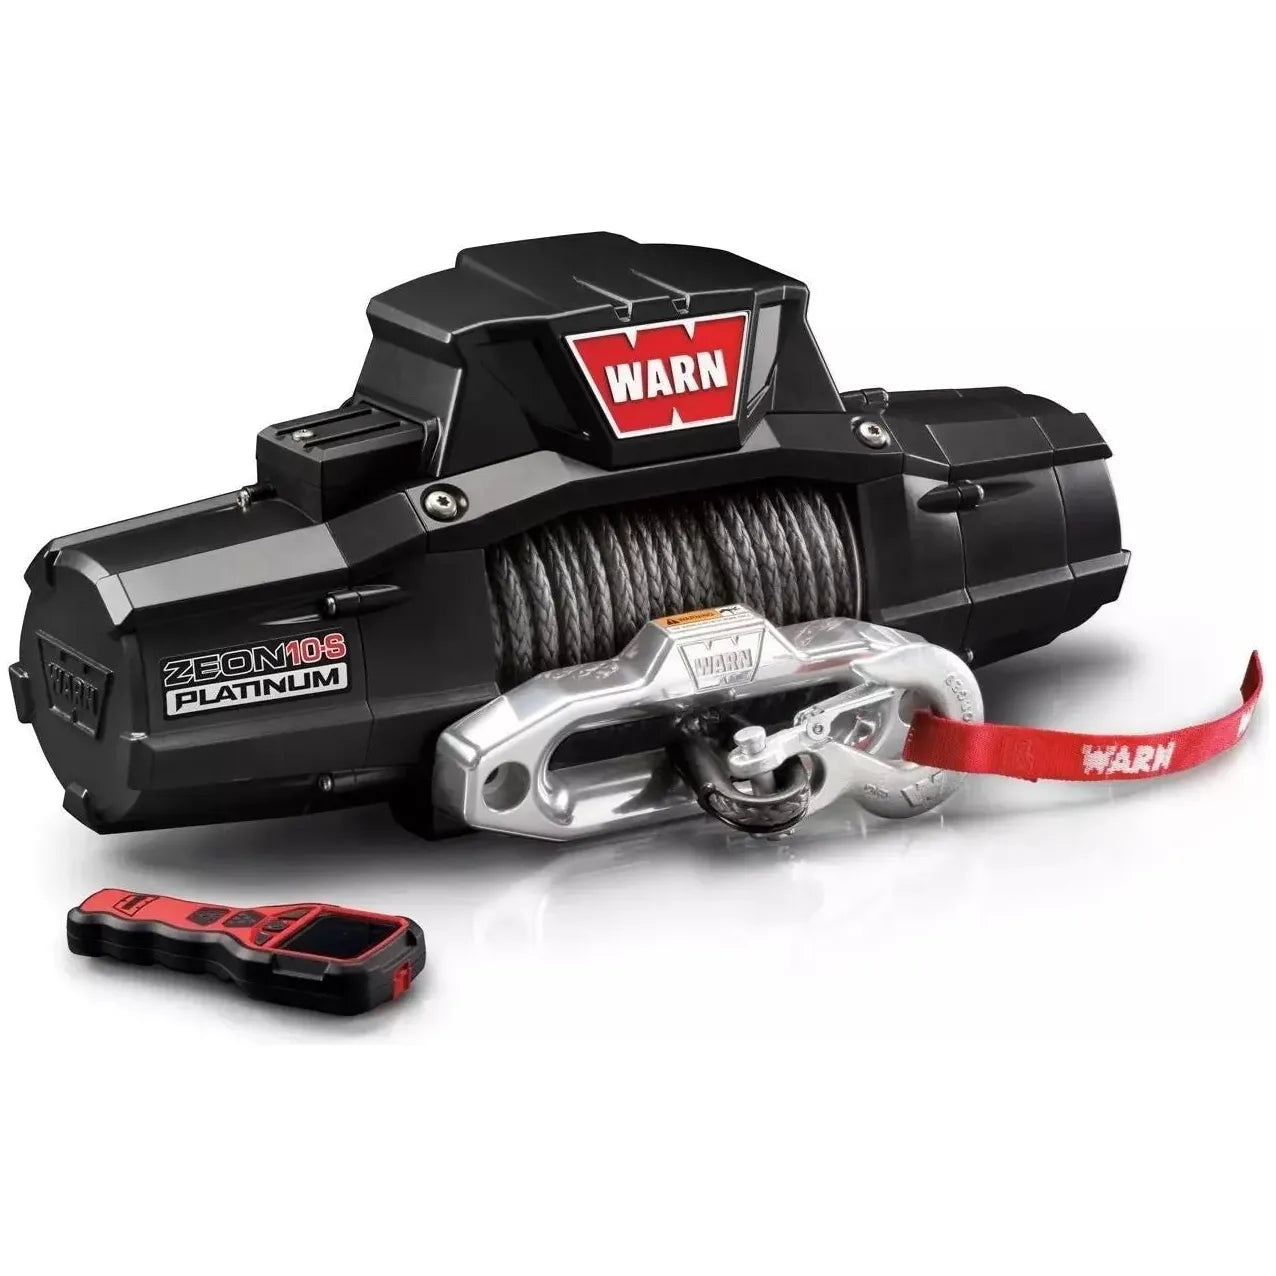 Warn ZEON Platinum 10-S Recovery 10000lb Winch with Spydura Synthetic Rope - 92815 - Truck Accessories Guy